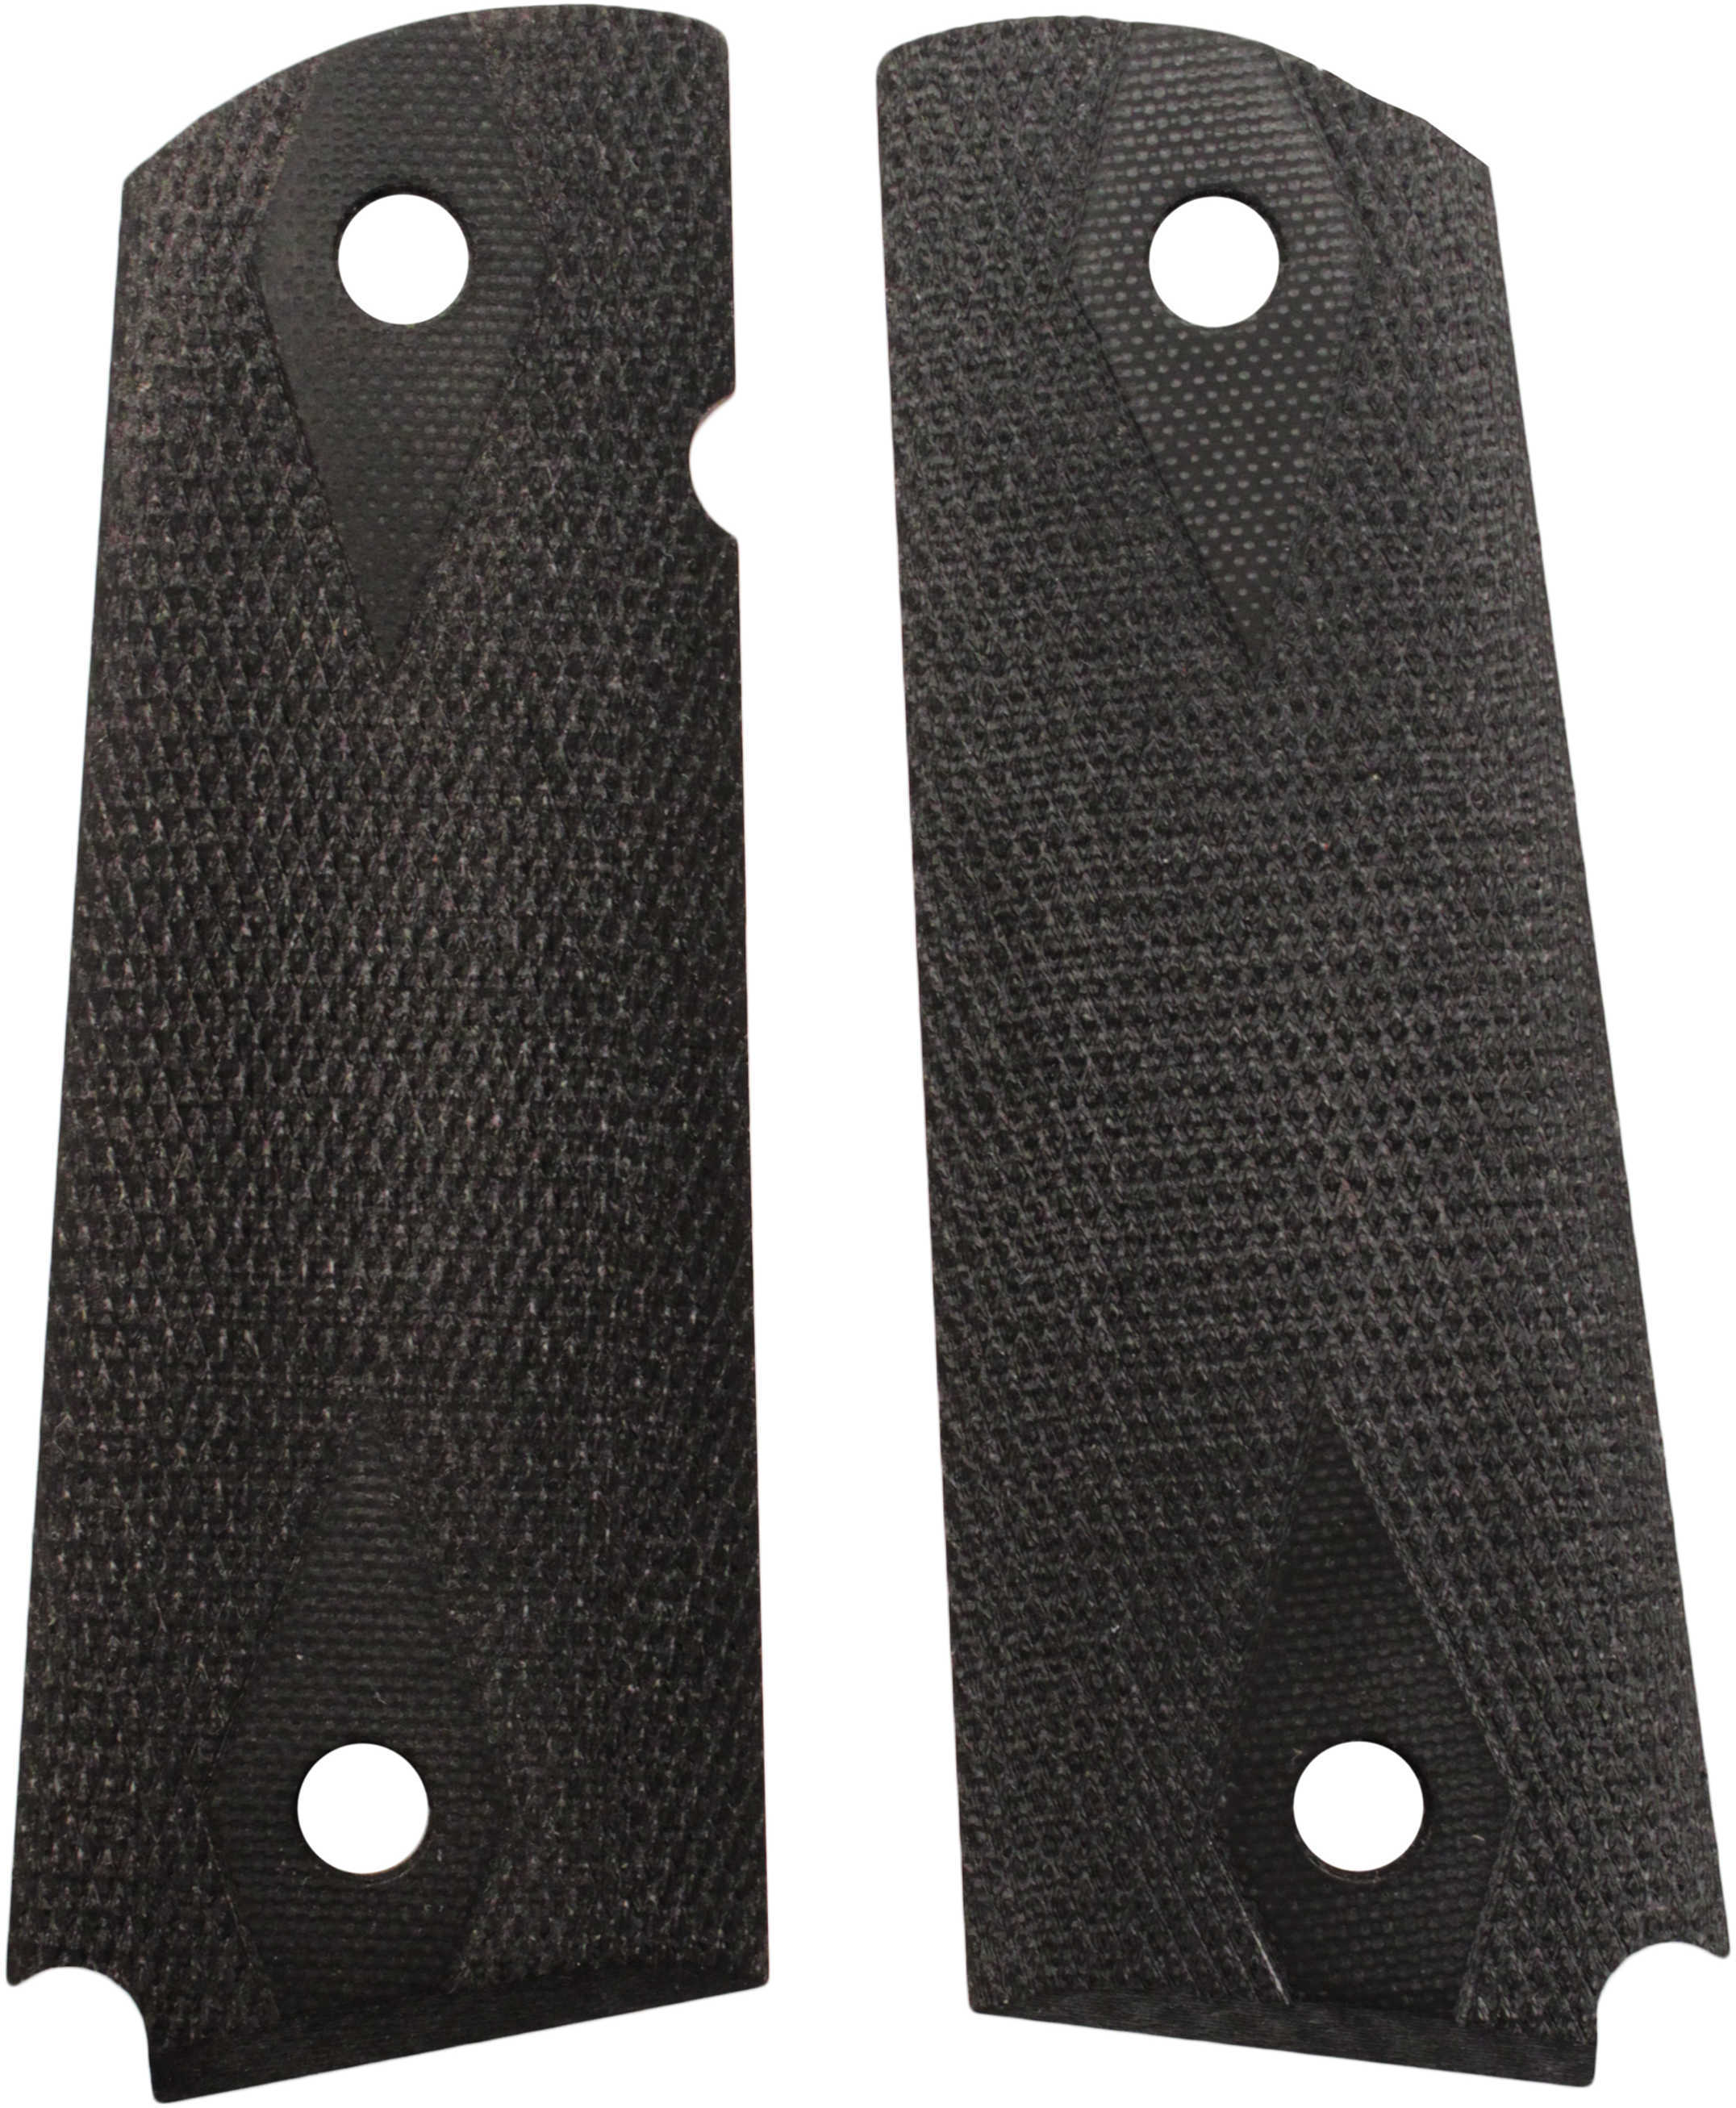 Hogue 1911 Government/Commander 3/16" Thin Grips G-10 Checkered Solid Black 01479